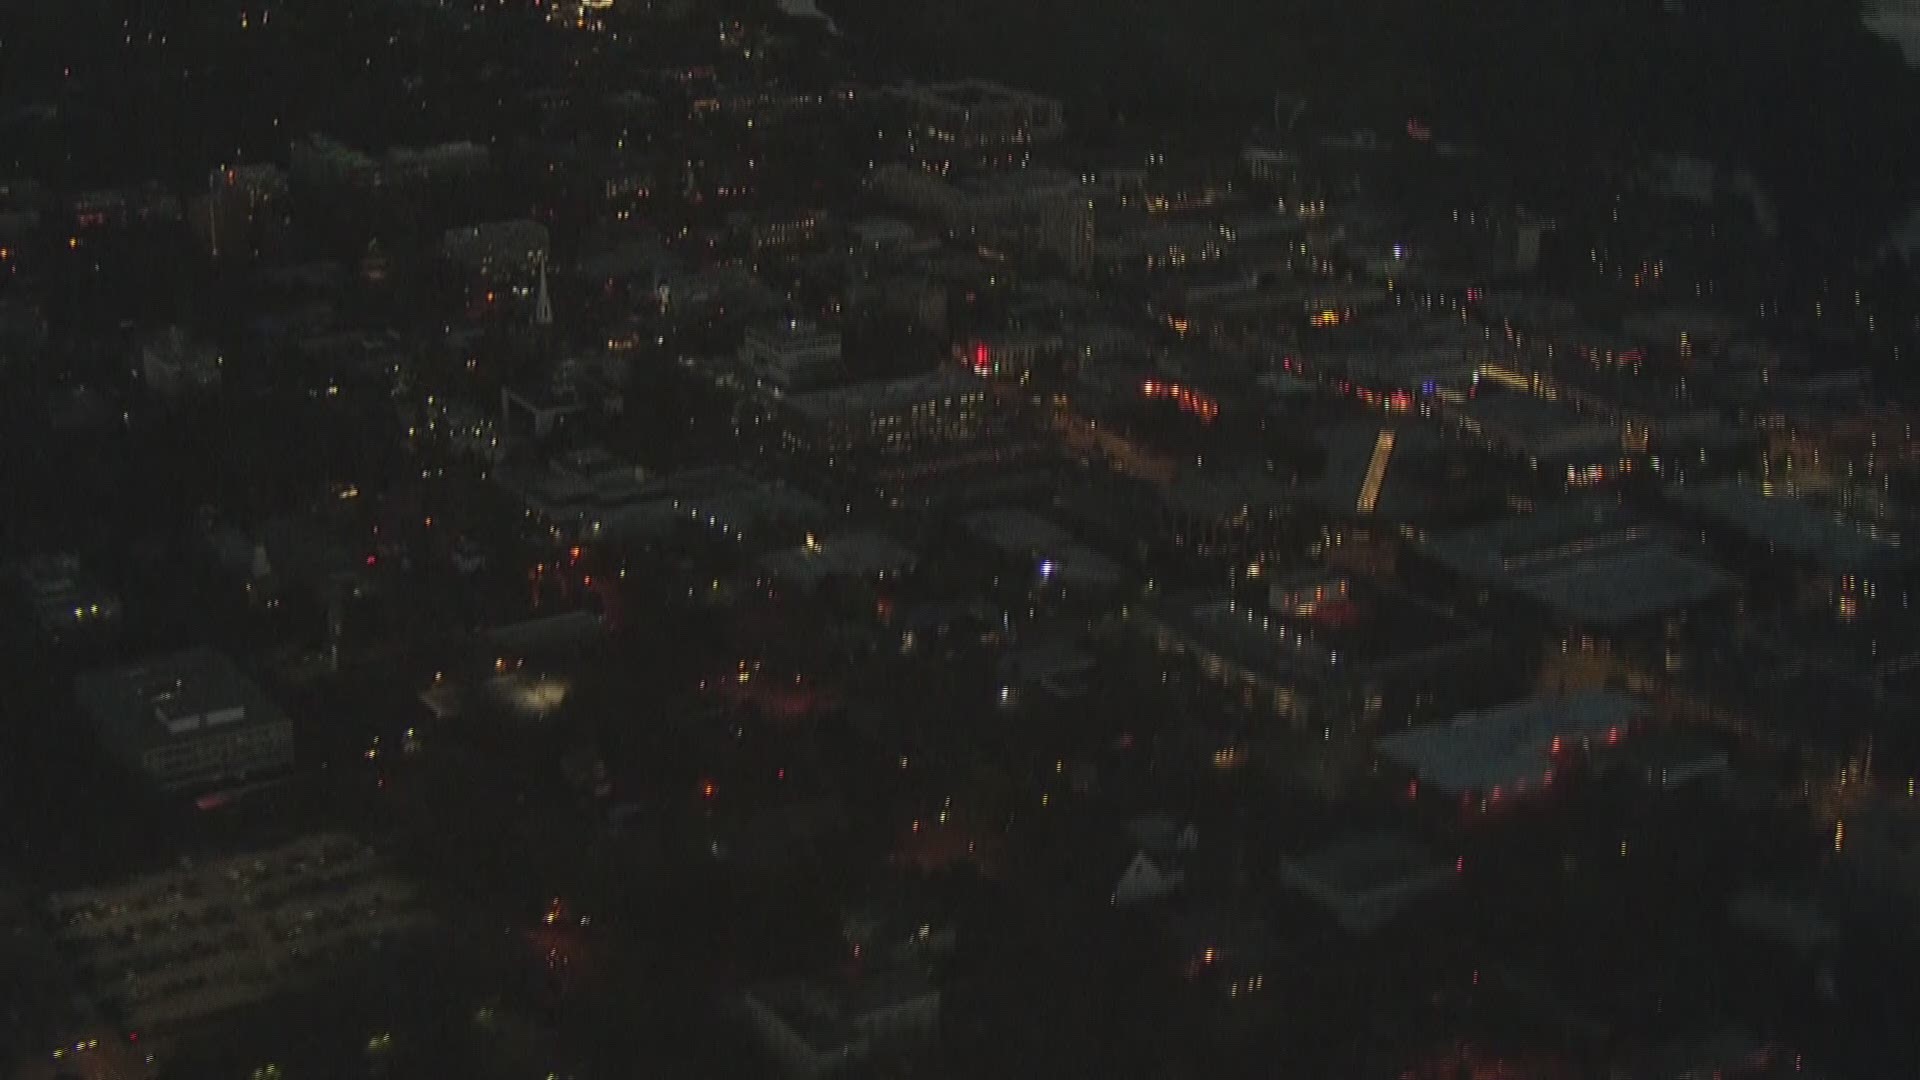 Timelapse of Salem, Oregon going dark during a total solar eclipse on Aug. 21, 2017. View from KGW's Sky 8 helicopter.